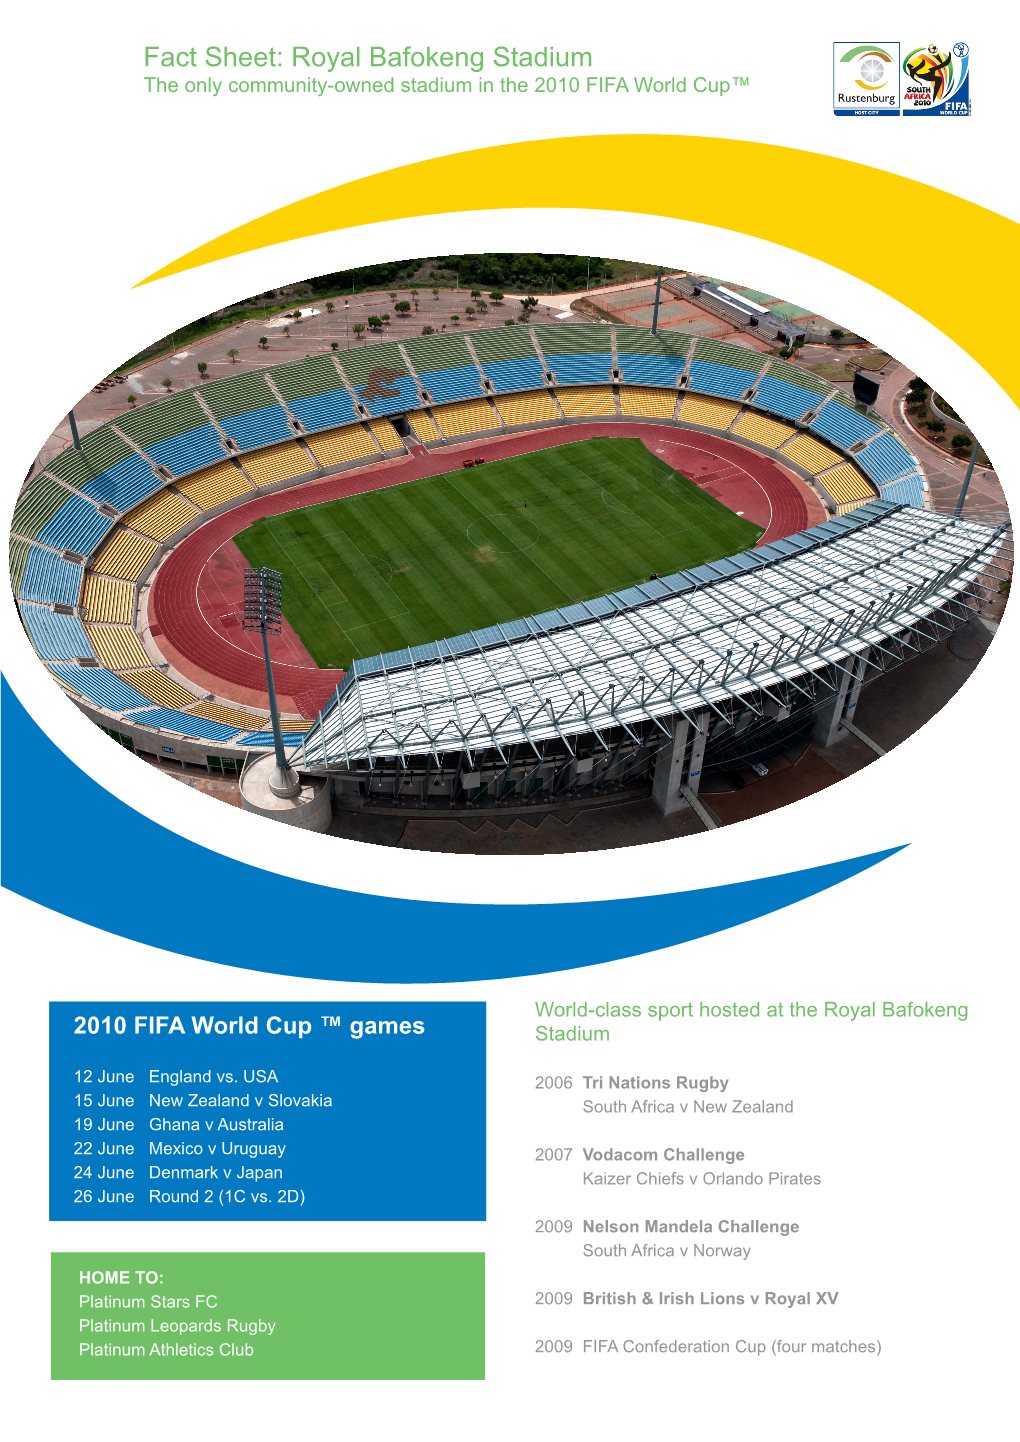 Royal Bafokeng Stadium the Only Community-Owned Stadium in the 2010 FIFA World Cup™